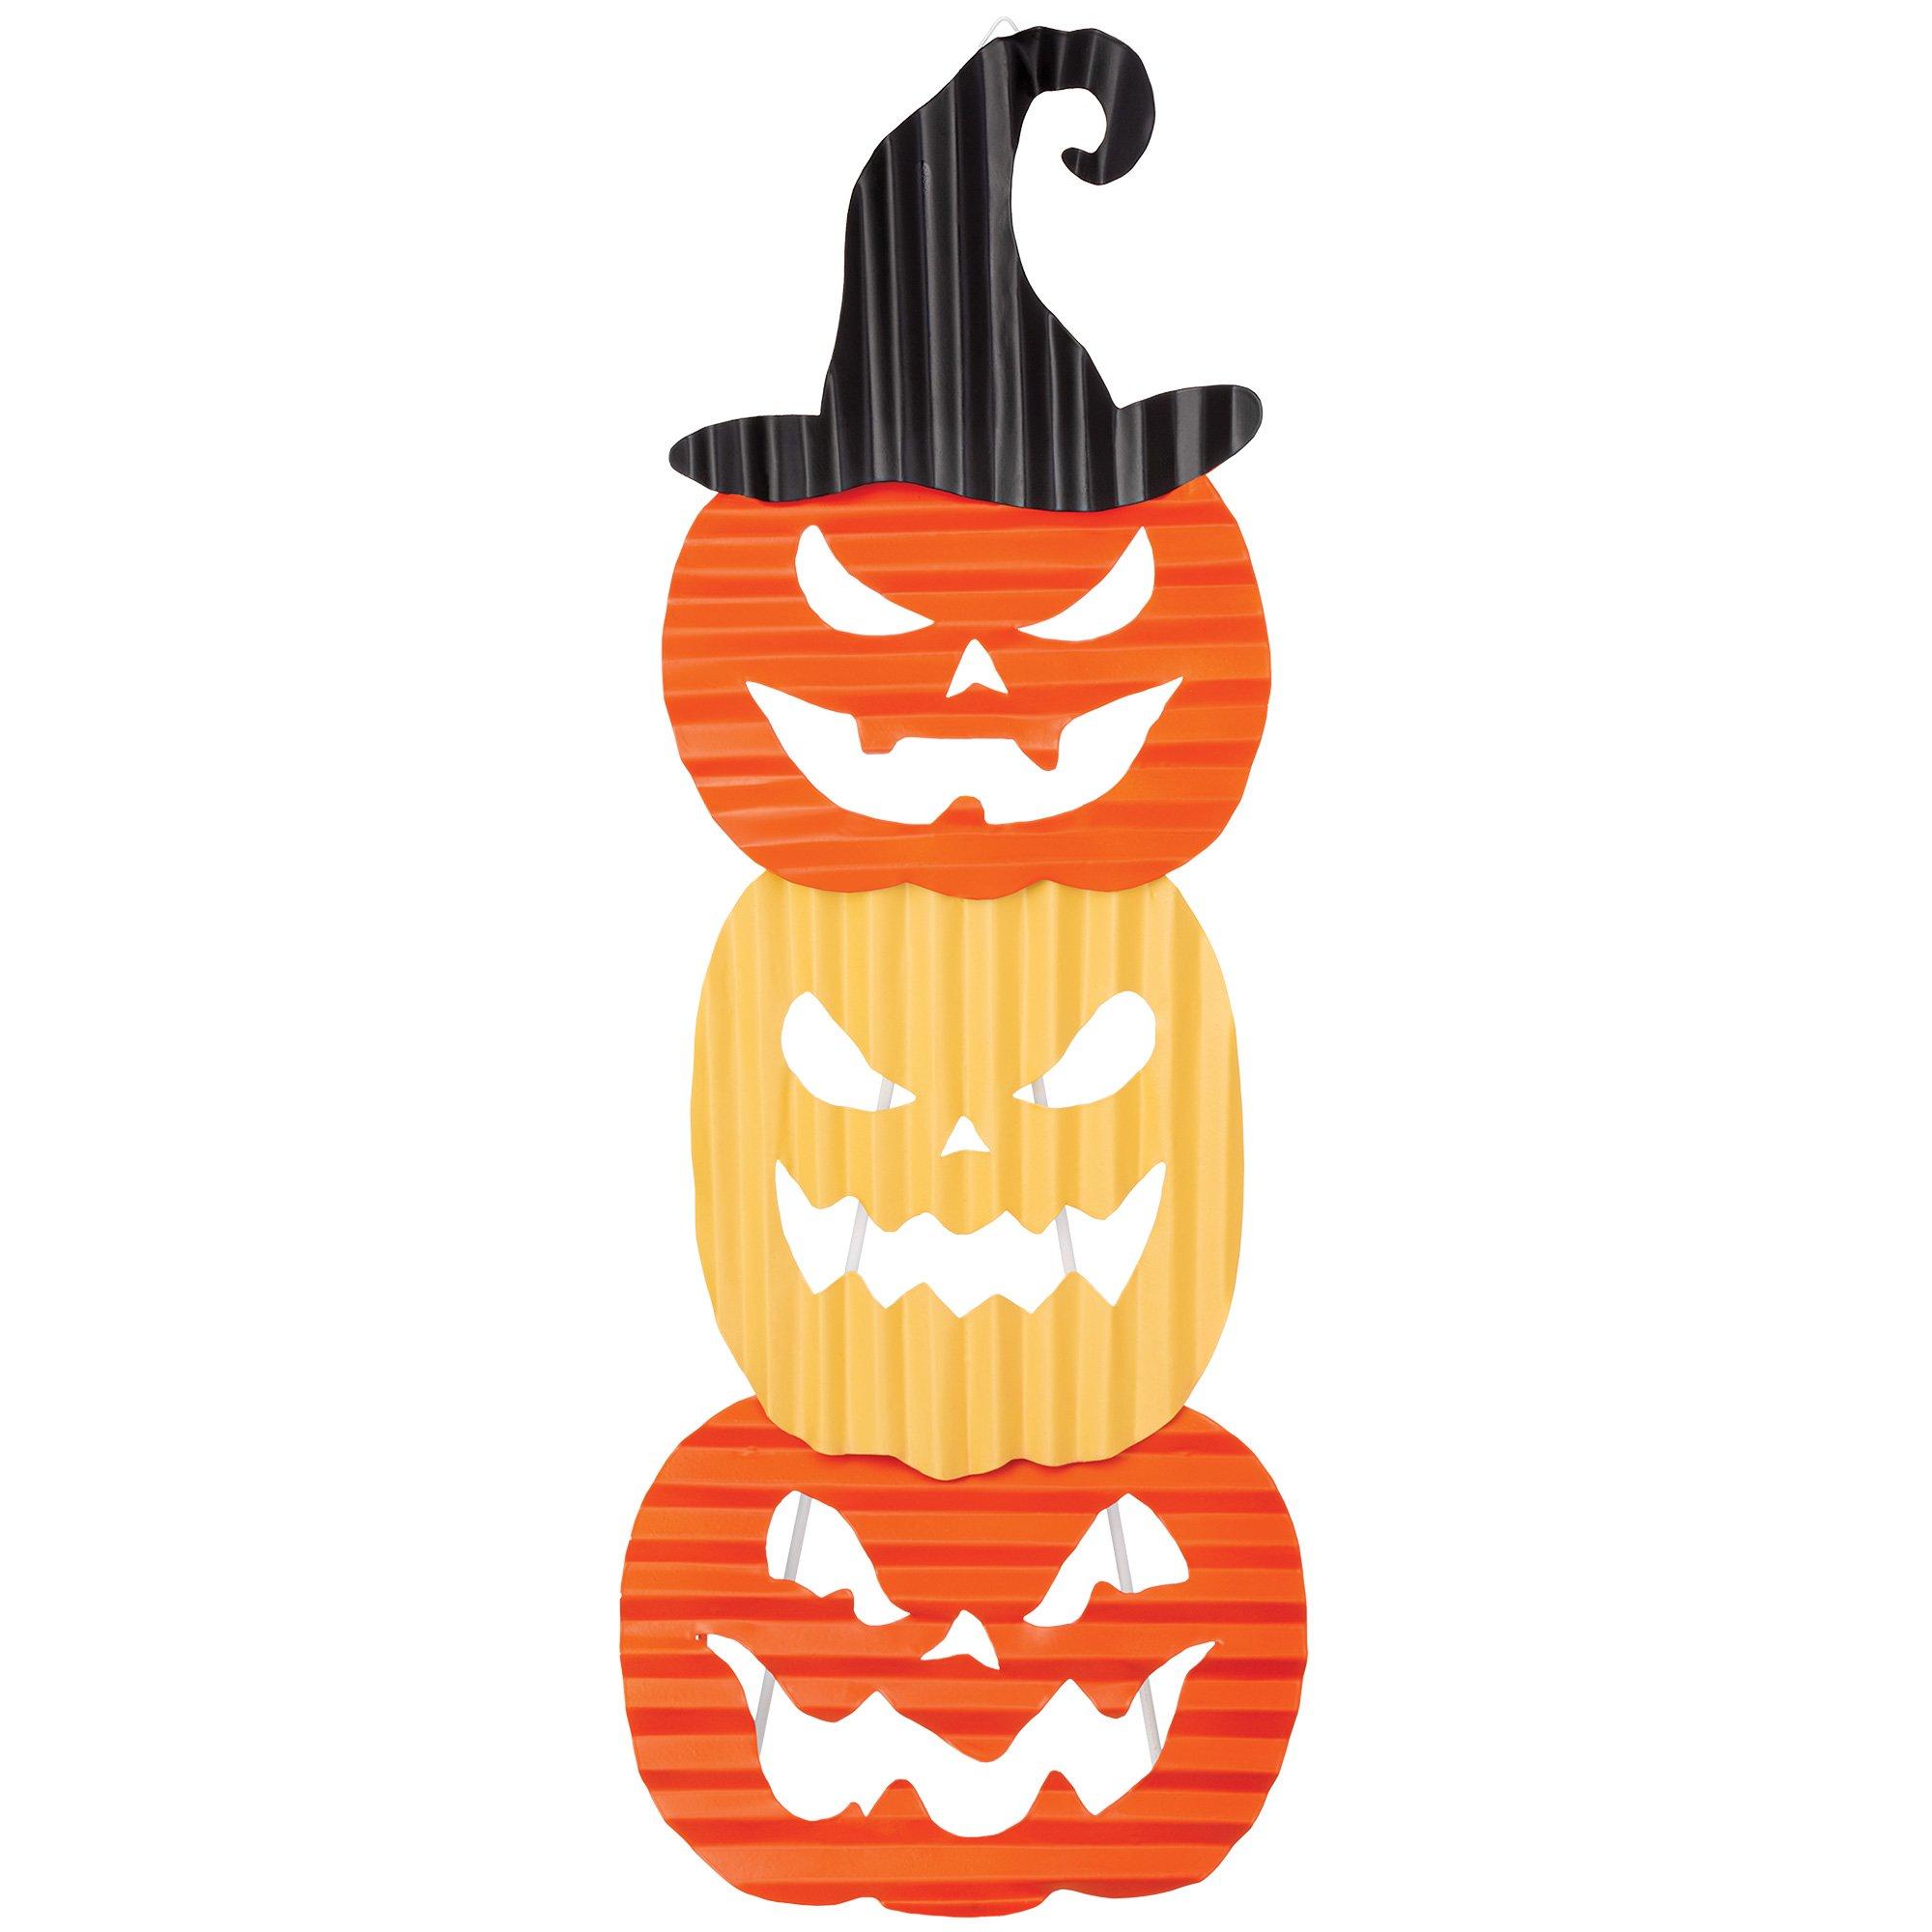 Jack-o'-Lantern Corrugated Metal Stacked Sign, 9.8in x 28in